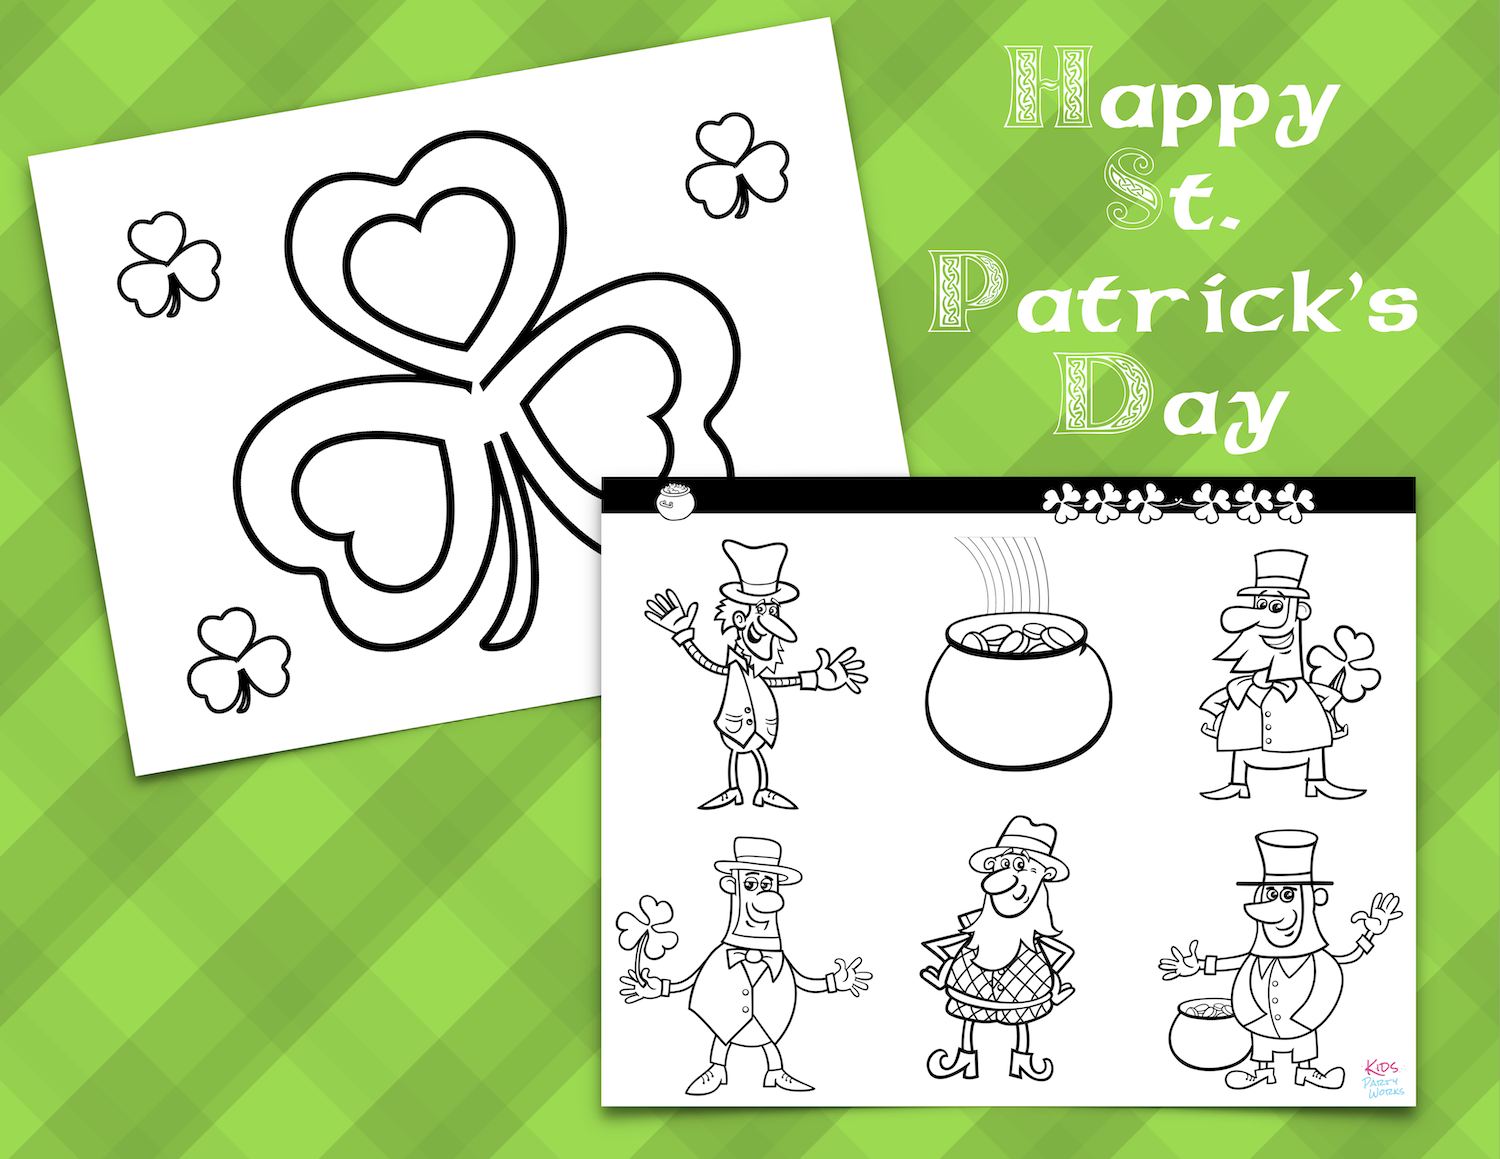 St. Patrick's Day Coloring Pages at KidsPartyWorks.Com